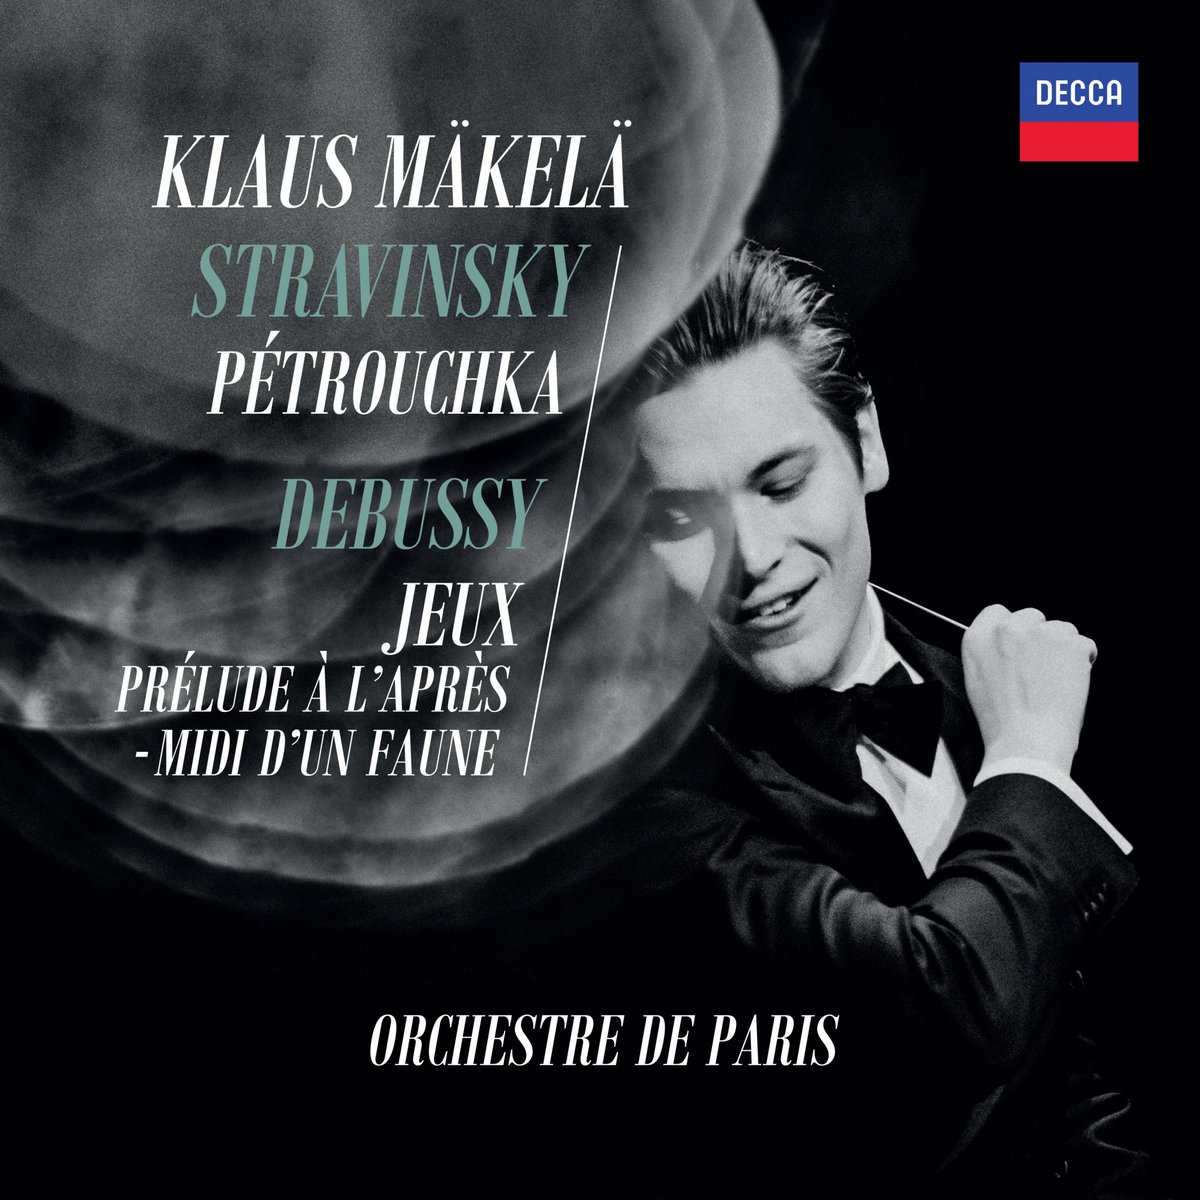 Orchestre de Paris playing Stravinsky and Debussy will be out in early March! Jeux is perhaps the greatest masterpiece of the French repertoire. And Bertrand Chamayou plays the piano in Pétrouchka!